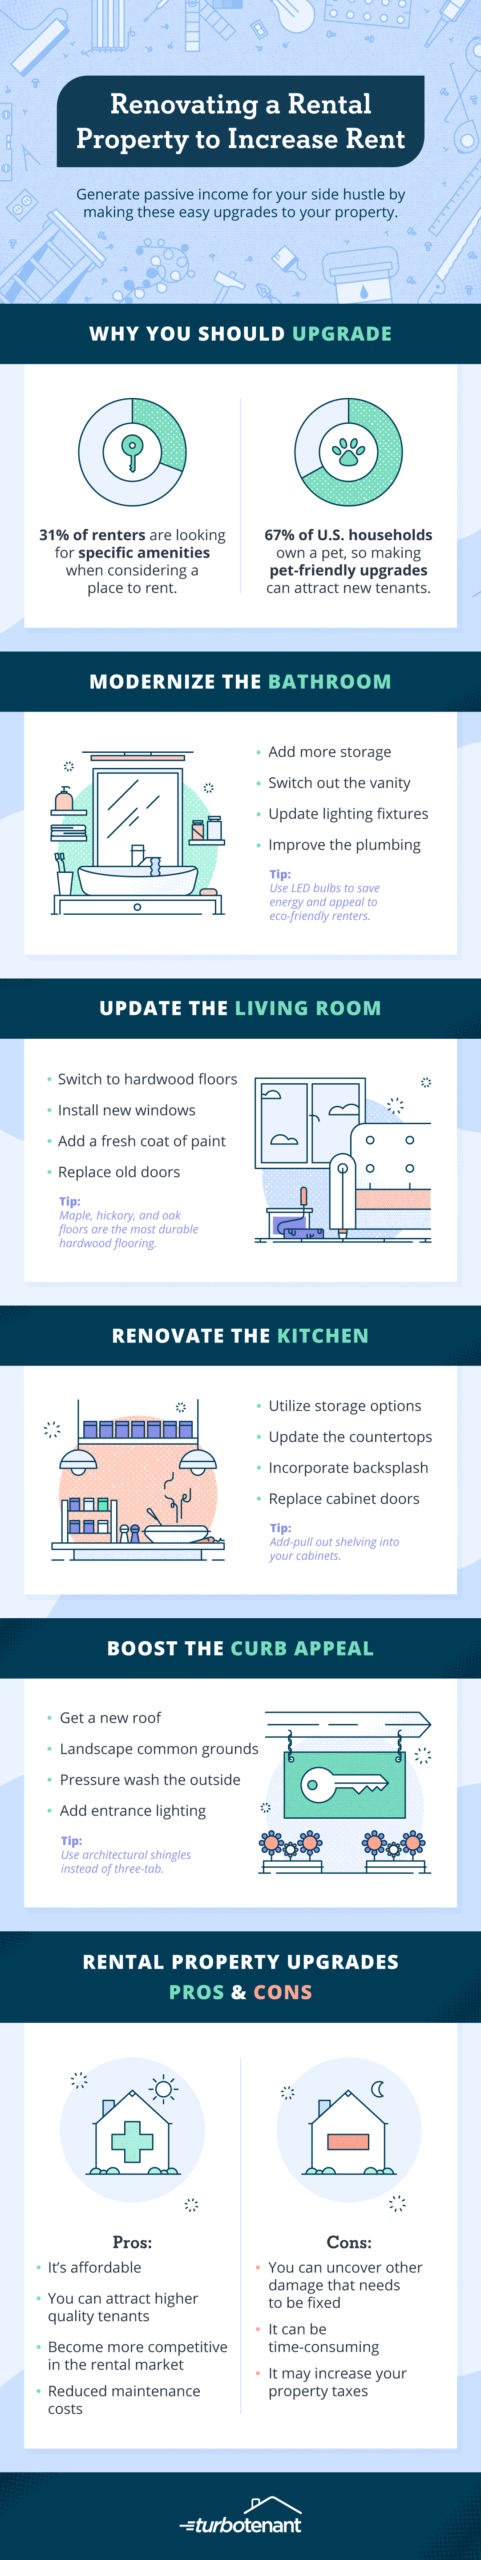 https://www.turbotenant.com/wp-content/uploads/2020/12/renovating-a-rental-property-to-increase-rent-infographic.png